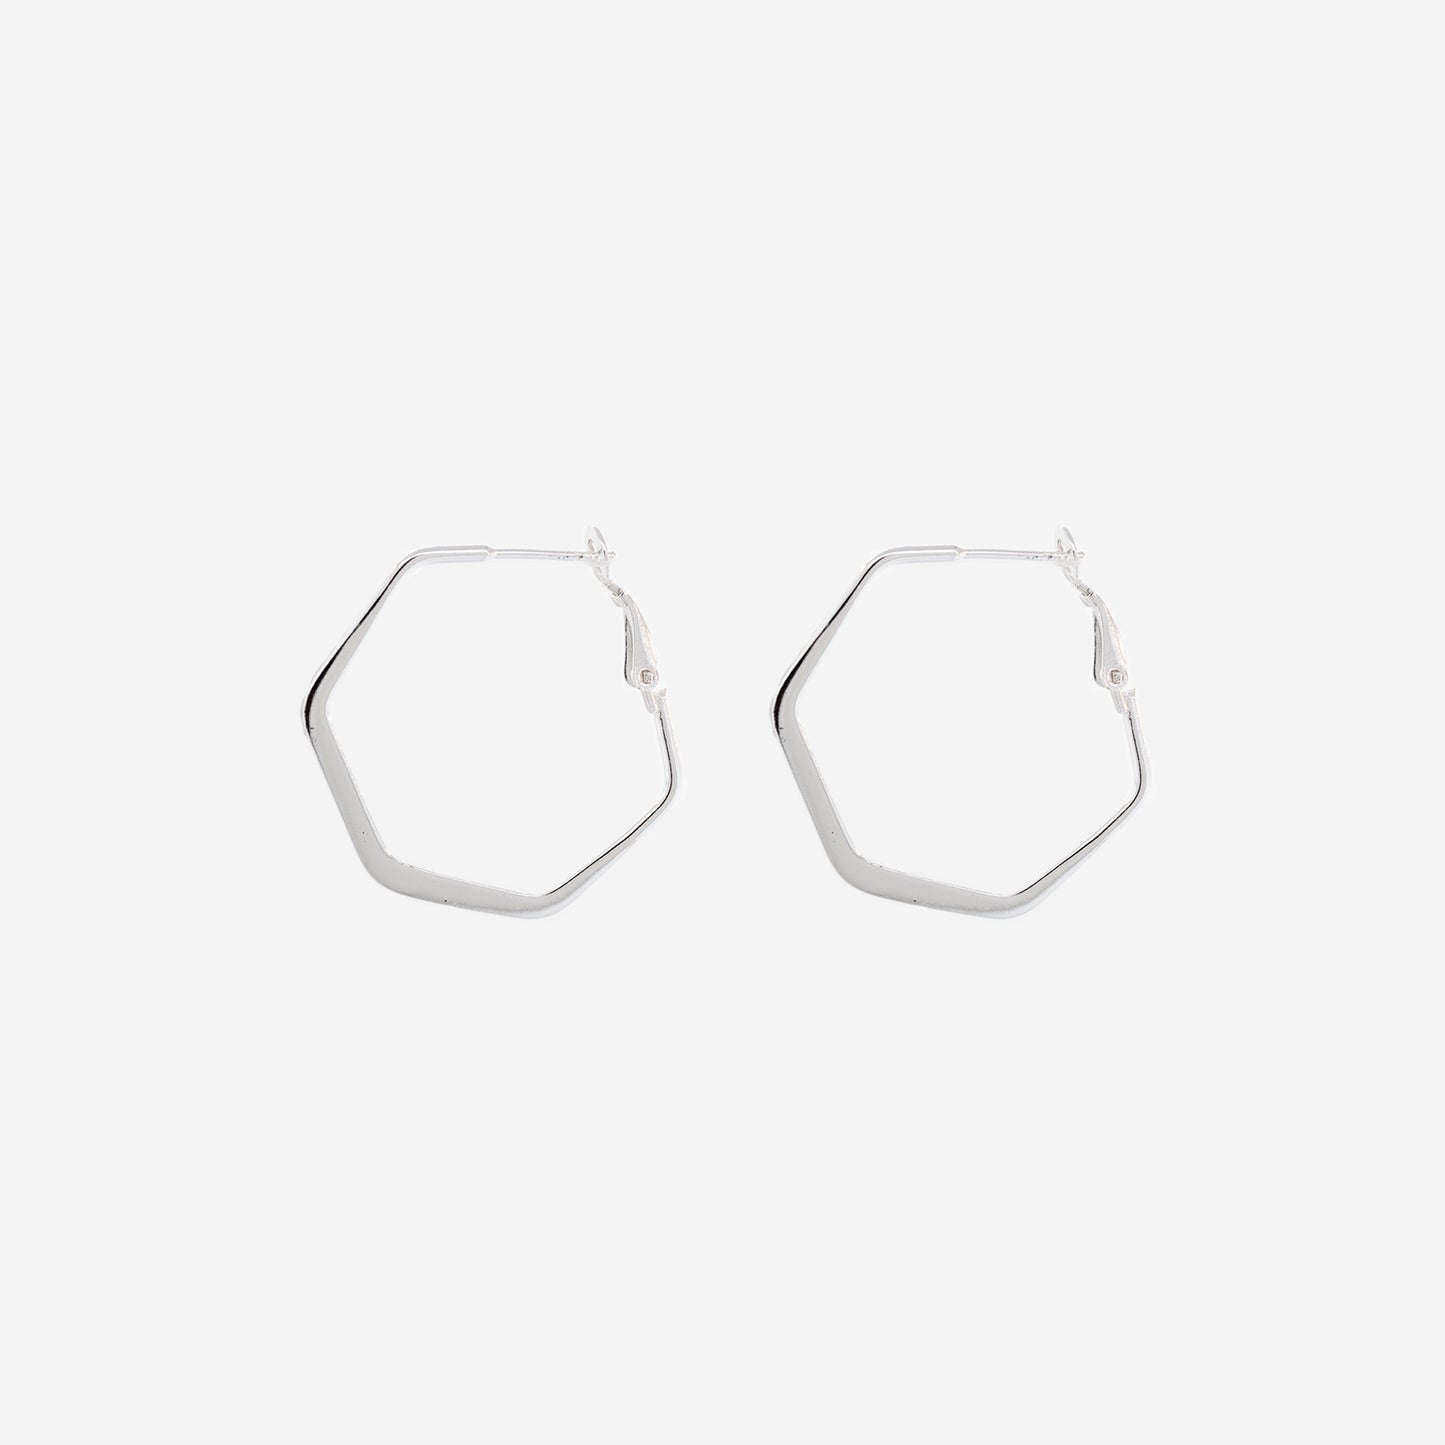 A pair of Flat Hexagon Hinged Hoops by Super Silver on a white background.